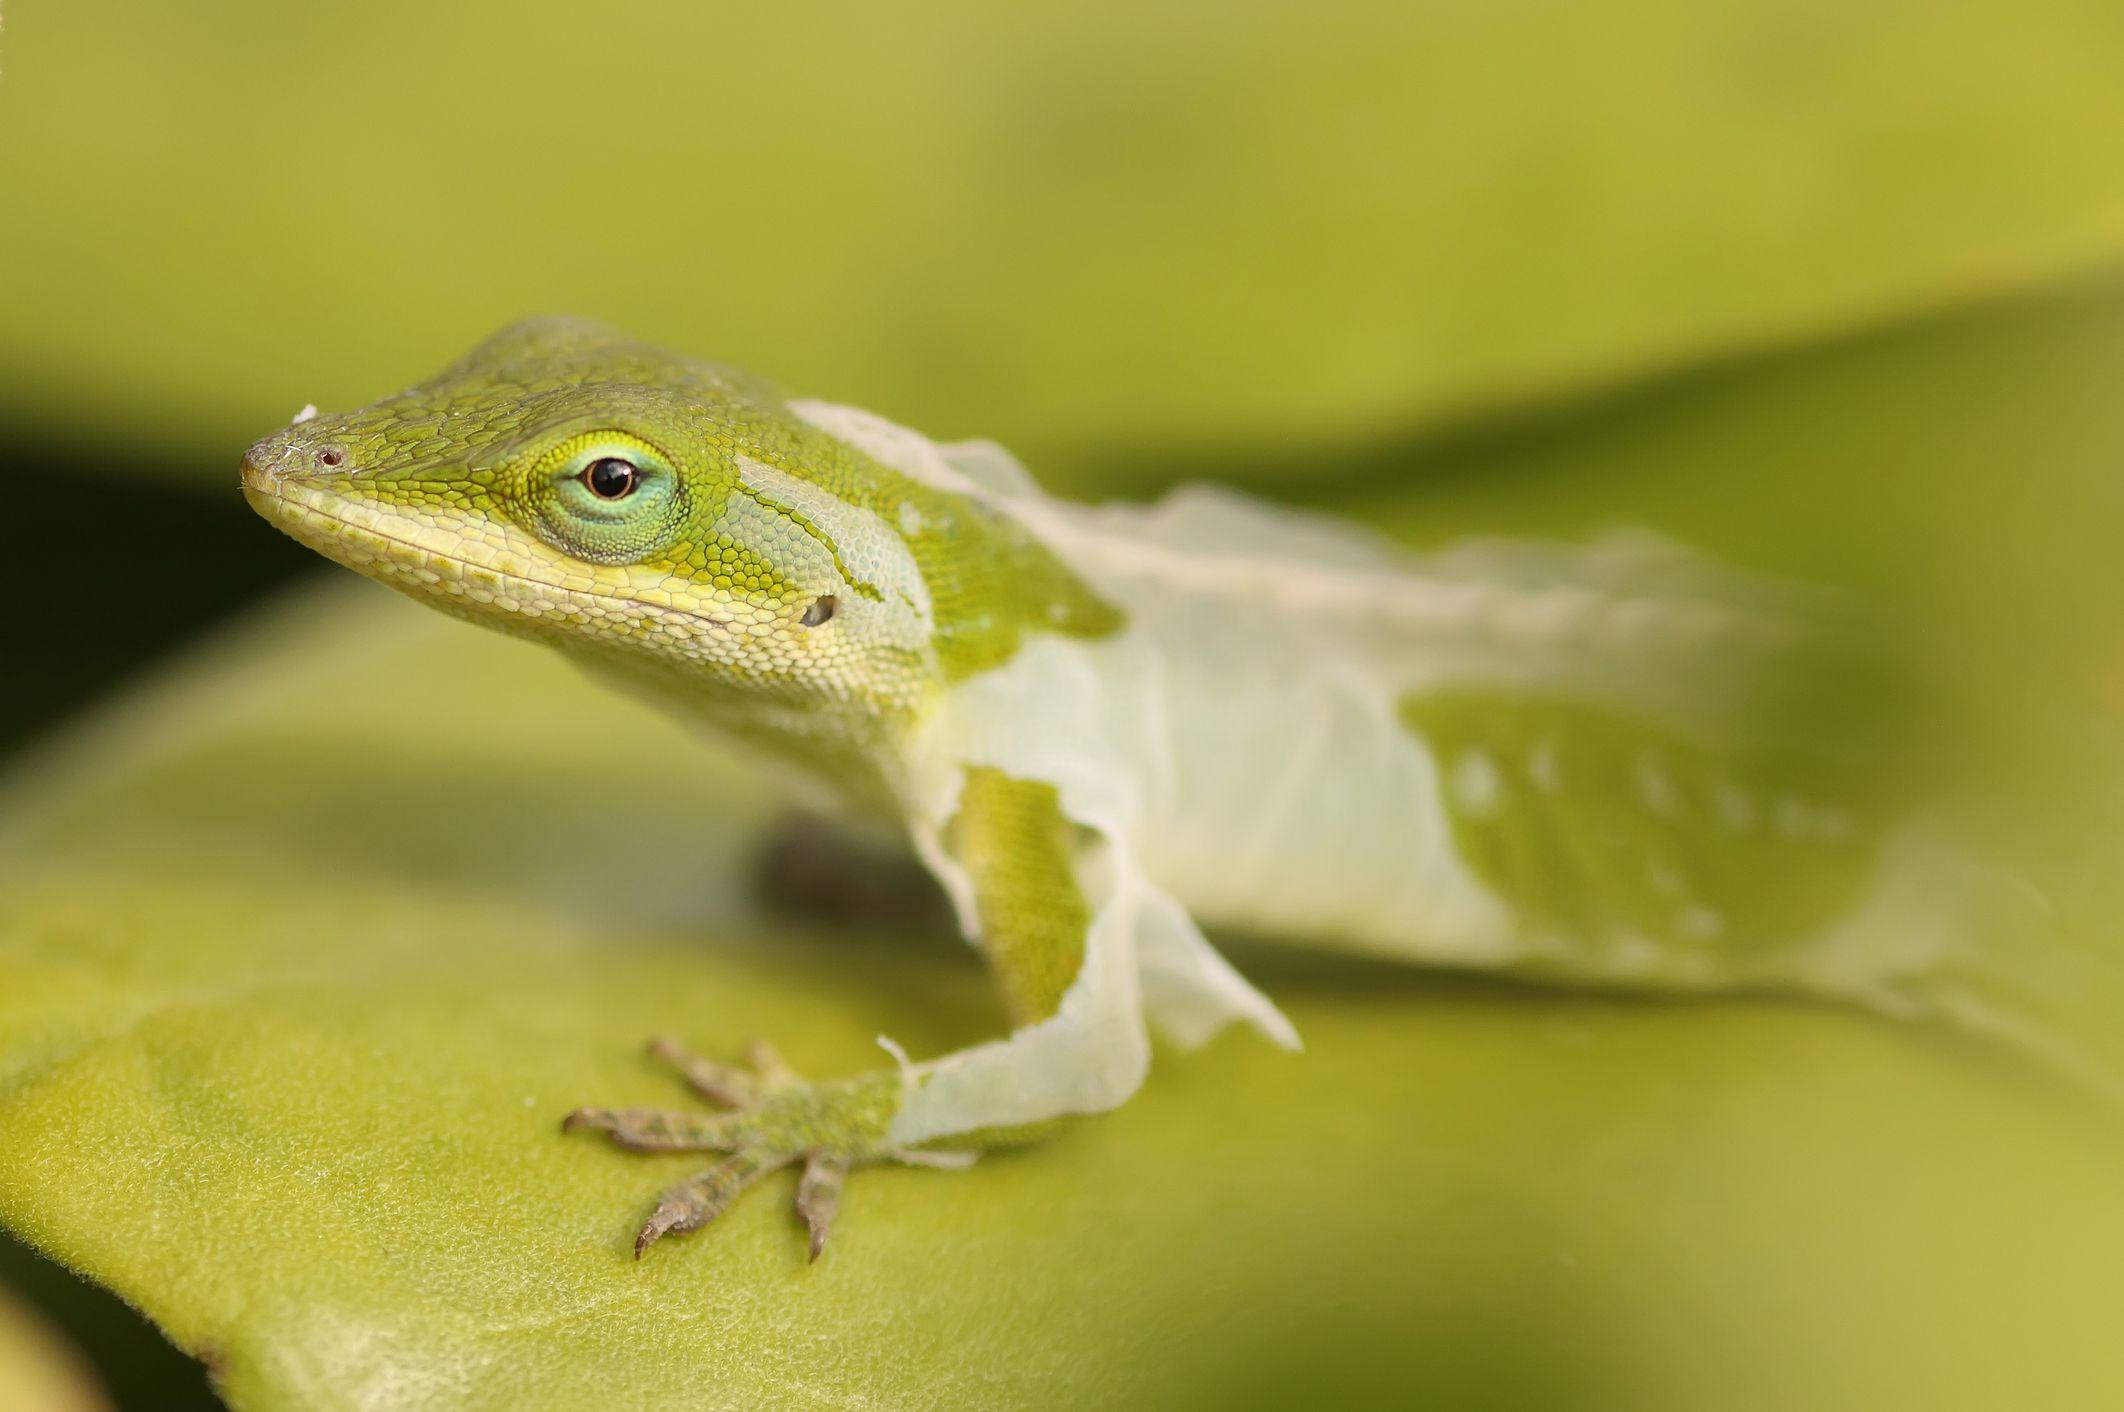 Preventing Incomplete Shedding Problems in Reptiles